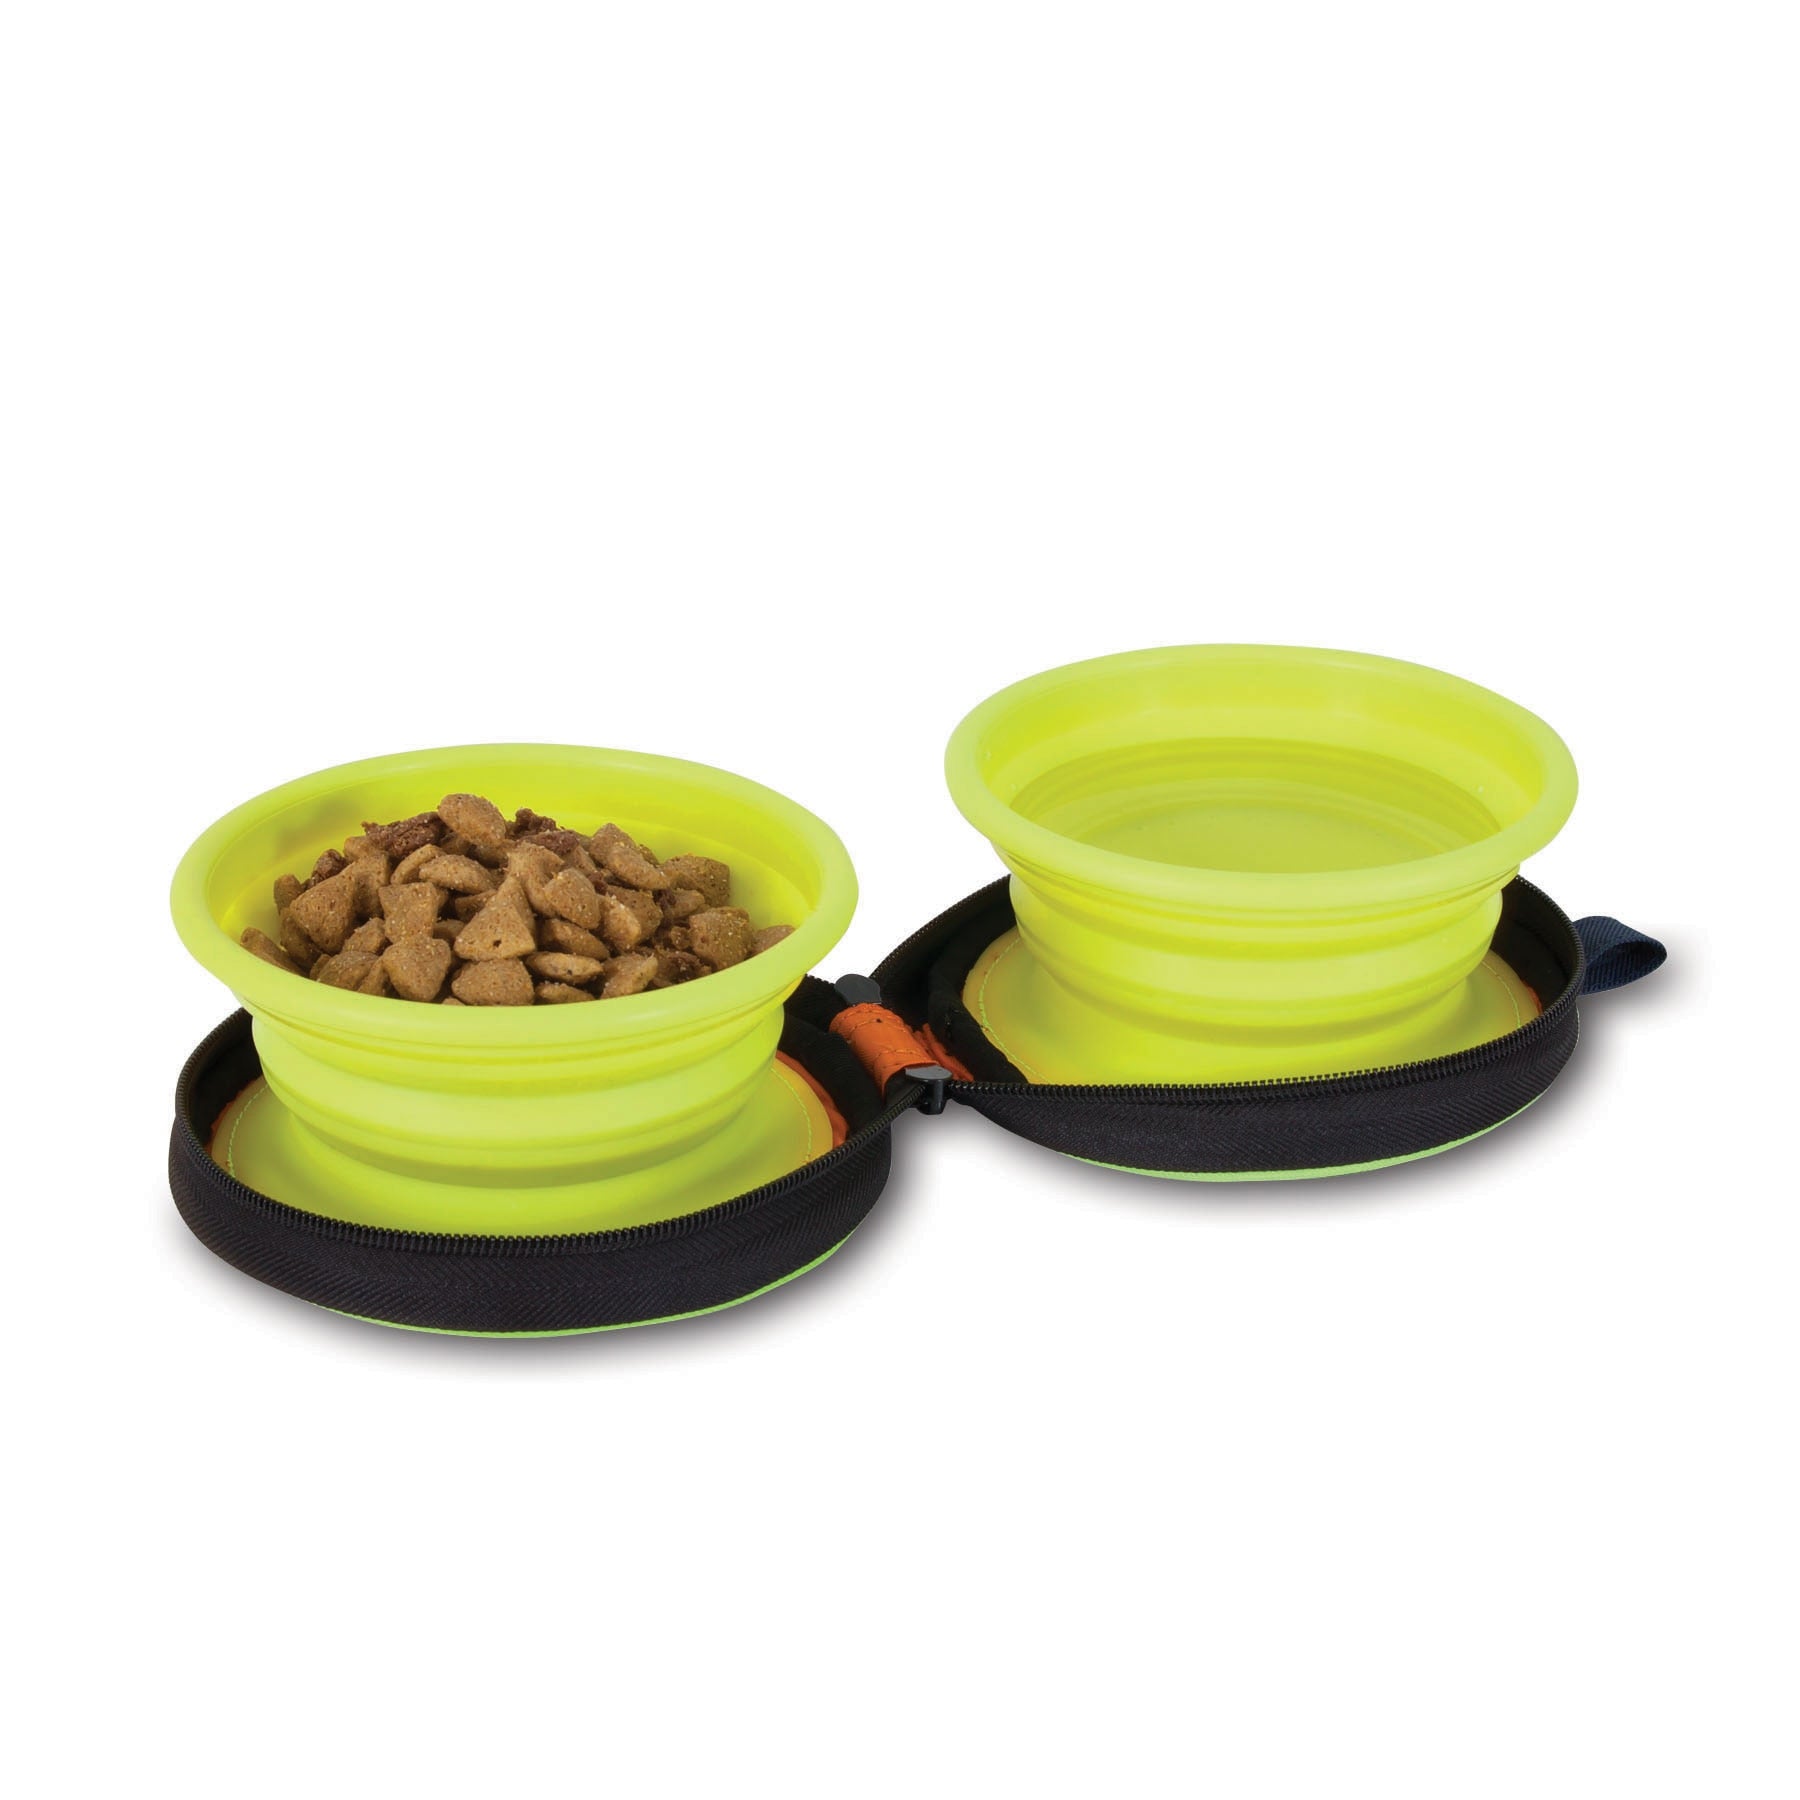 Petmate Silicone Collapsible Travel Dog Bowls